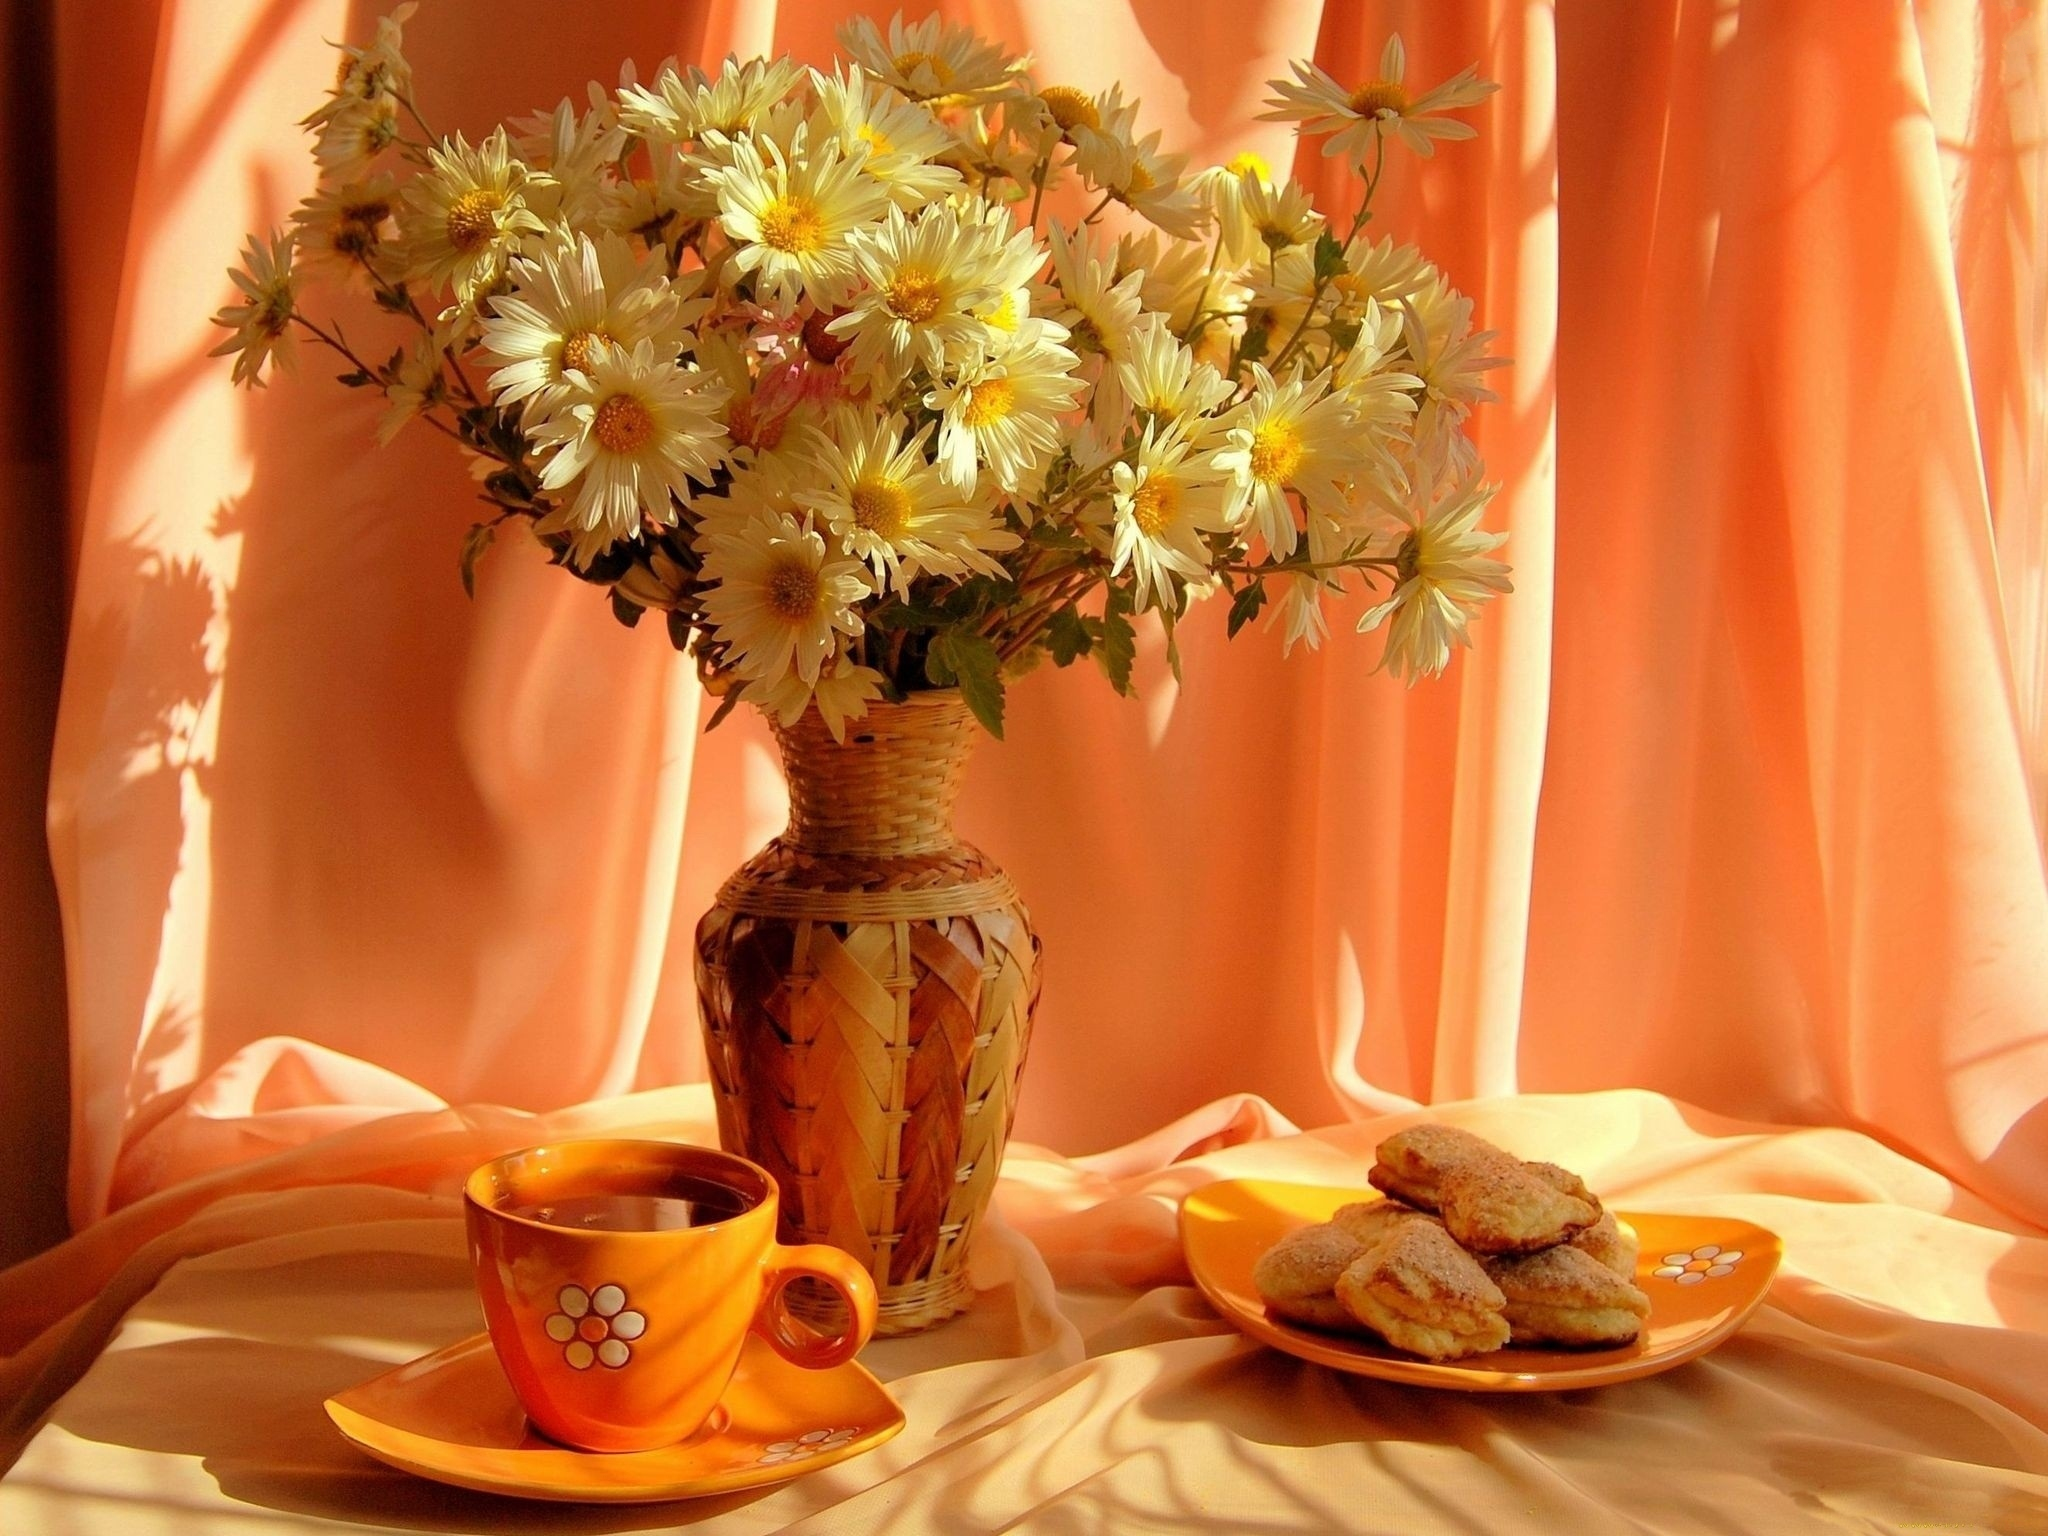 photography, still life, cookie, cup, daisy, flower, plate, vase